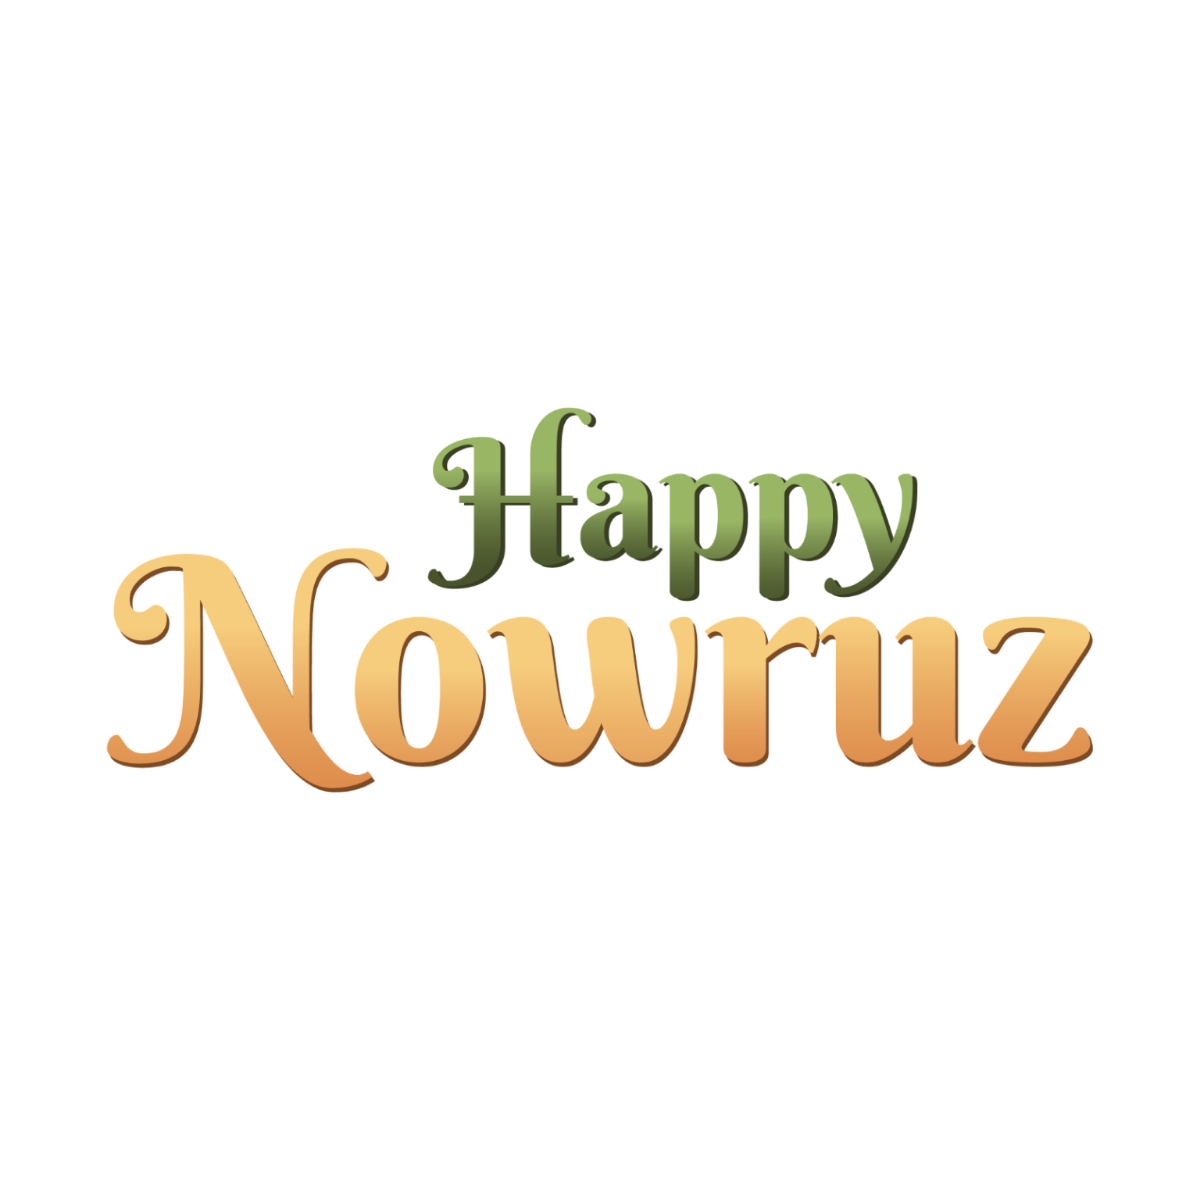 Free Nowruz Text Effect Template